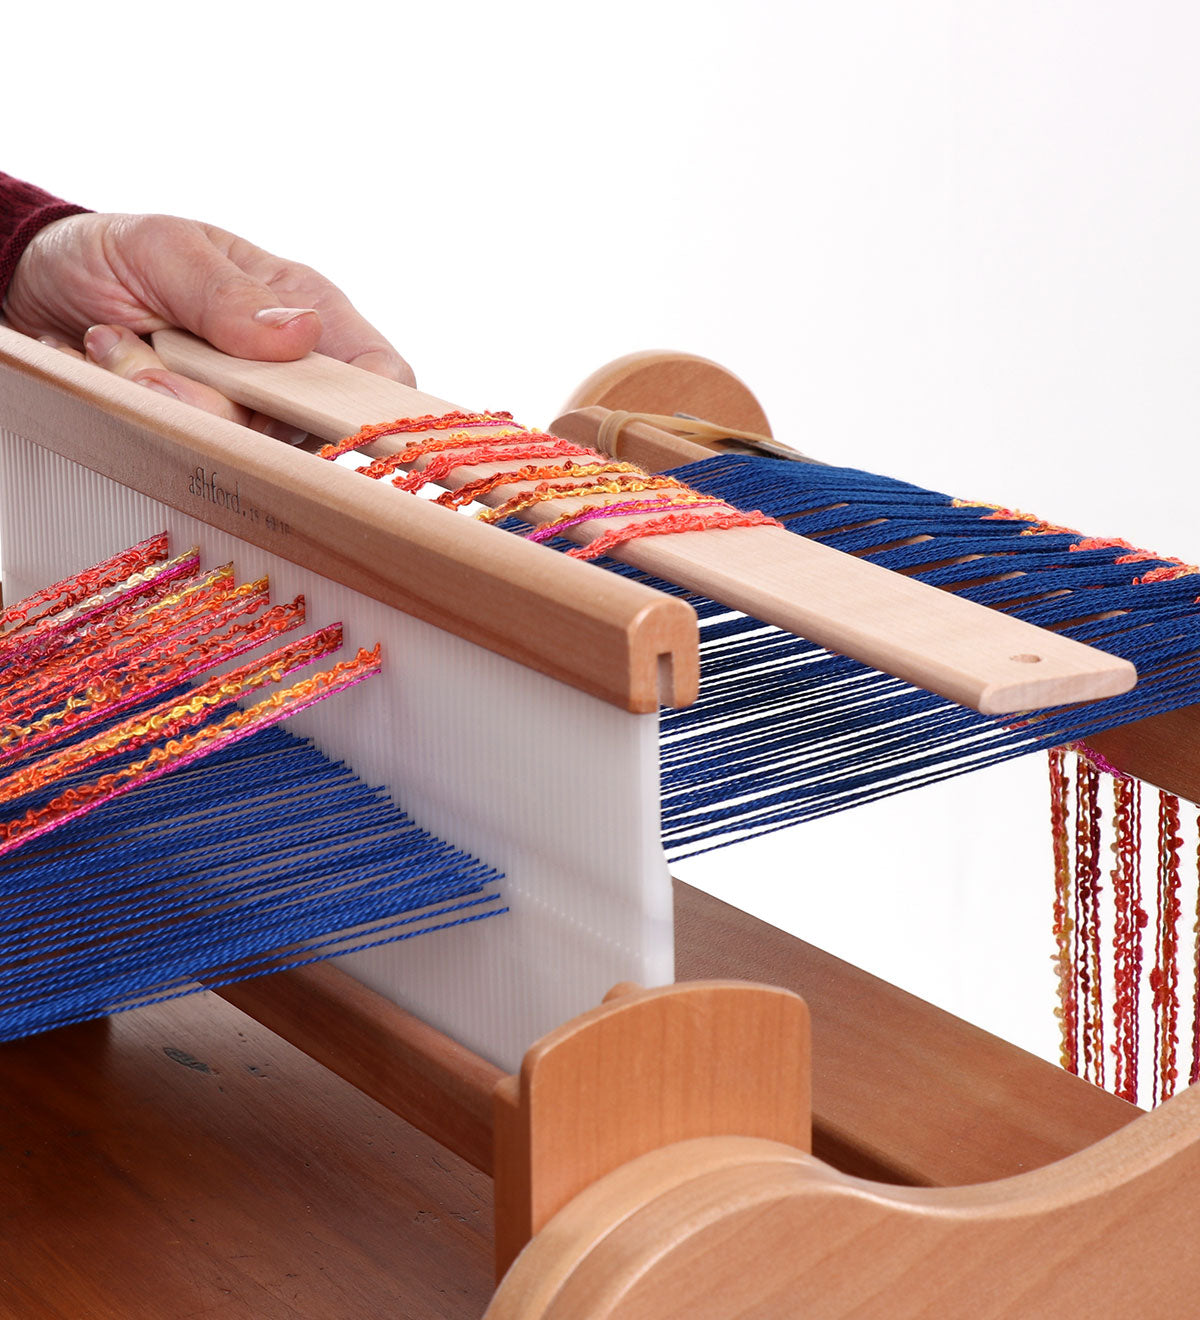 Ashford pickup stick shown in weaving on an Ashford rigid heddle loom with colorful warp